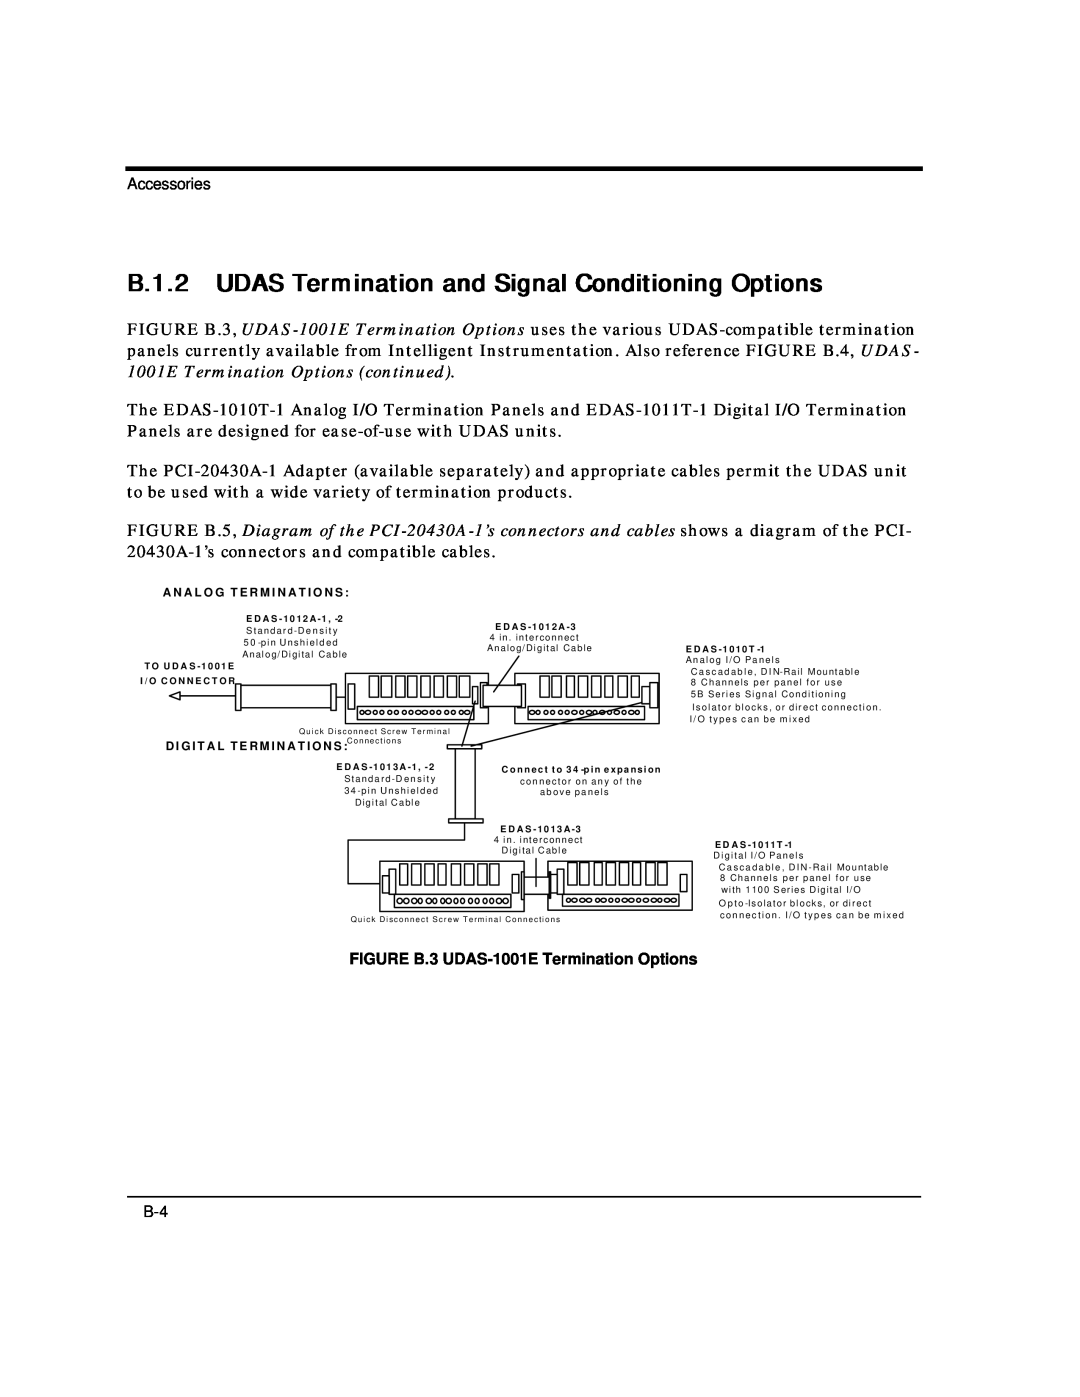 Intelligent Motion Systems UDAS-1001E user manual B.1.2 UDAS Termination and Signal Conditioning Options 